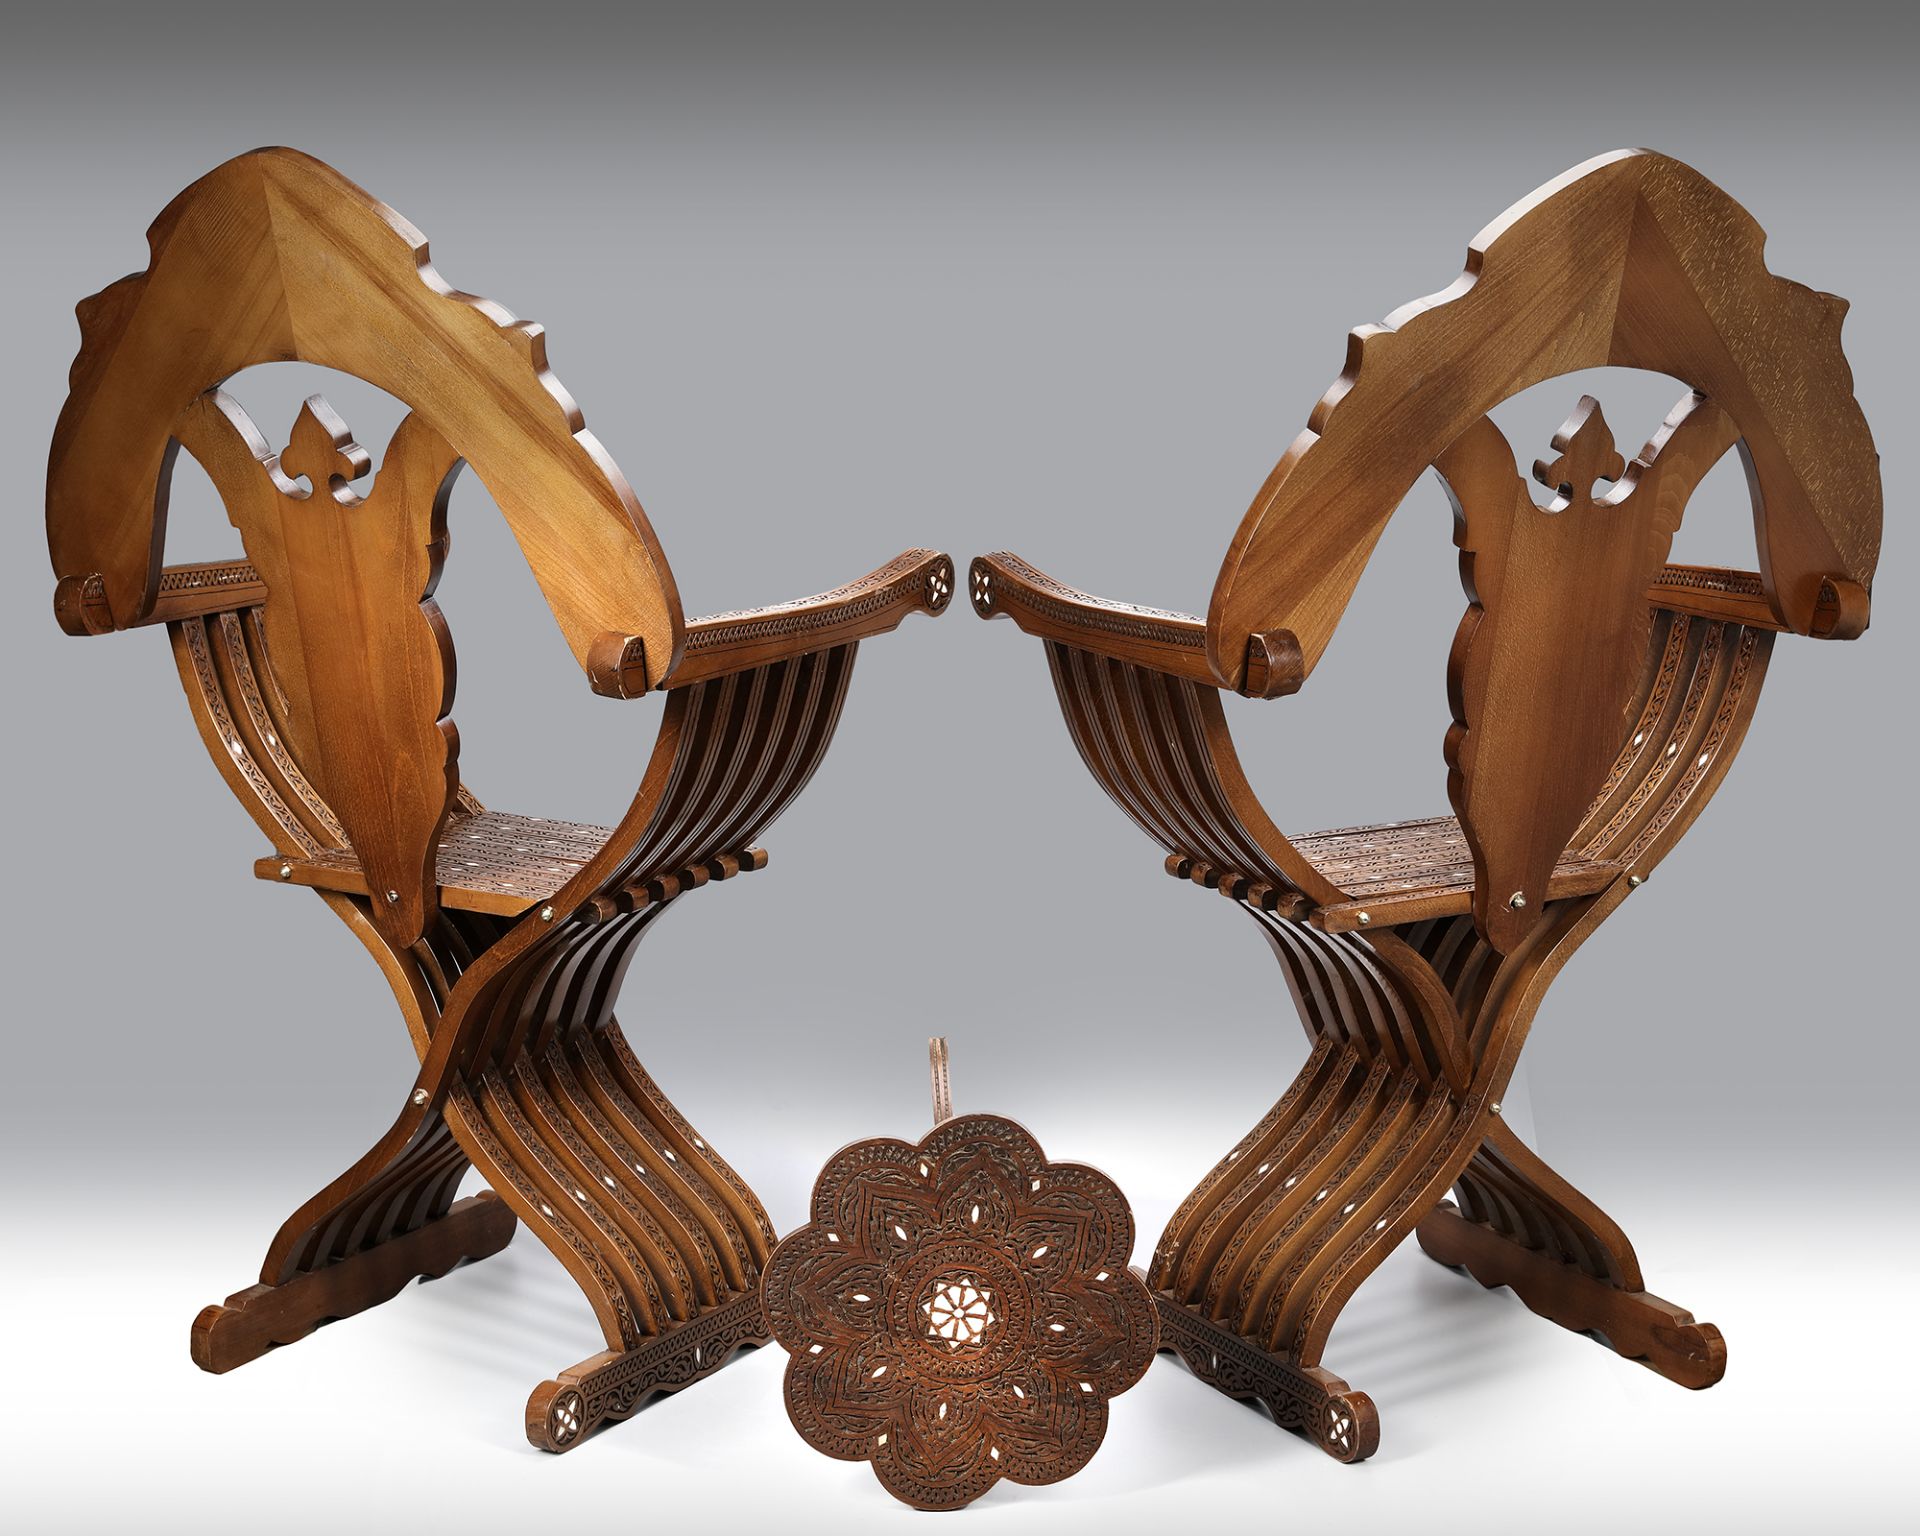 A PAIR OF SYRIAN MOTHER OF PEARL INLAID FOLDING CHAIRS AND A TABLE, LATE 19TH CENTURY - Bild 3 aus 3